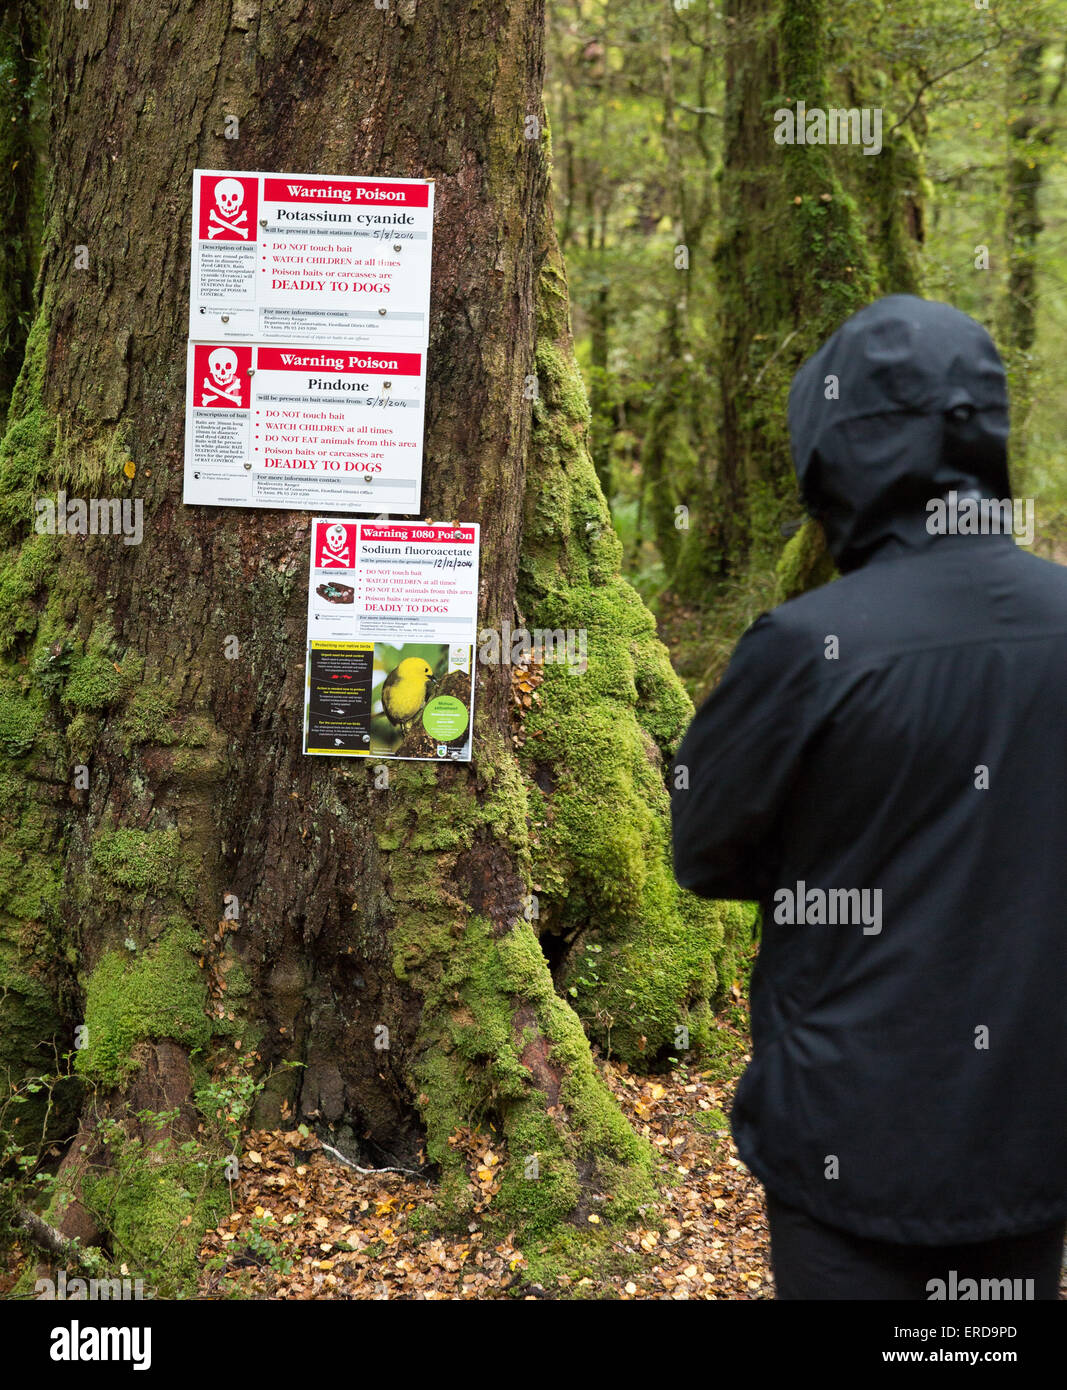 Entrance to the Lake Gunn Nature Walk in Fjordland South Island New Zealand warning of traps and poisons used for pest control Stock Photo